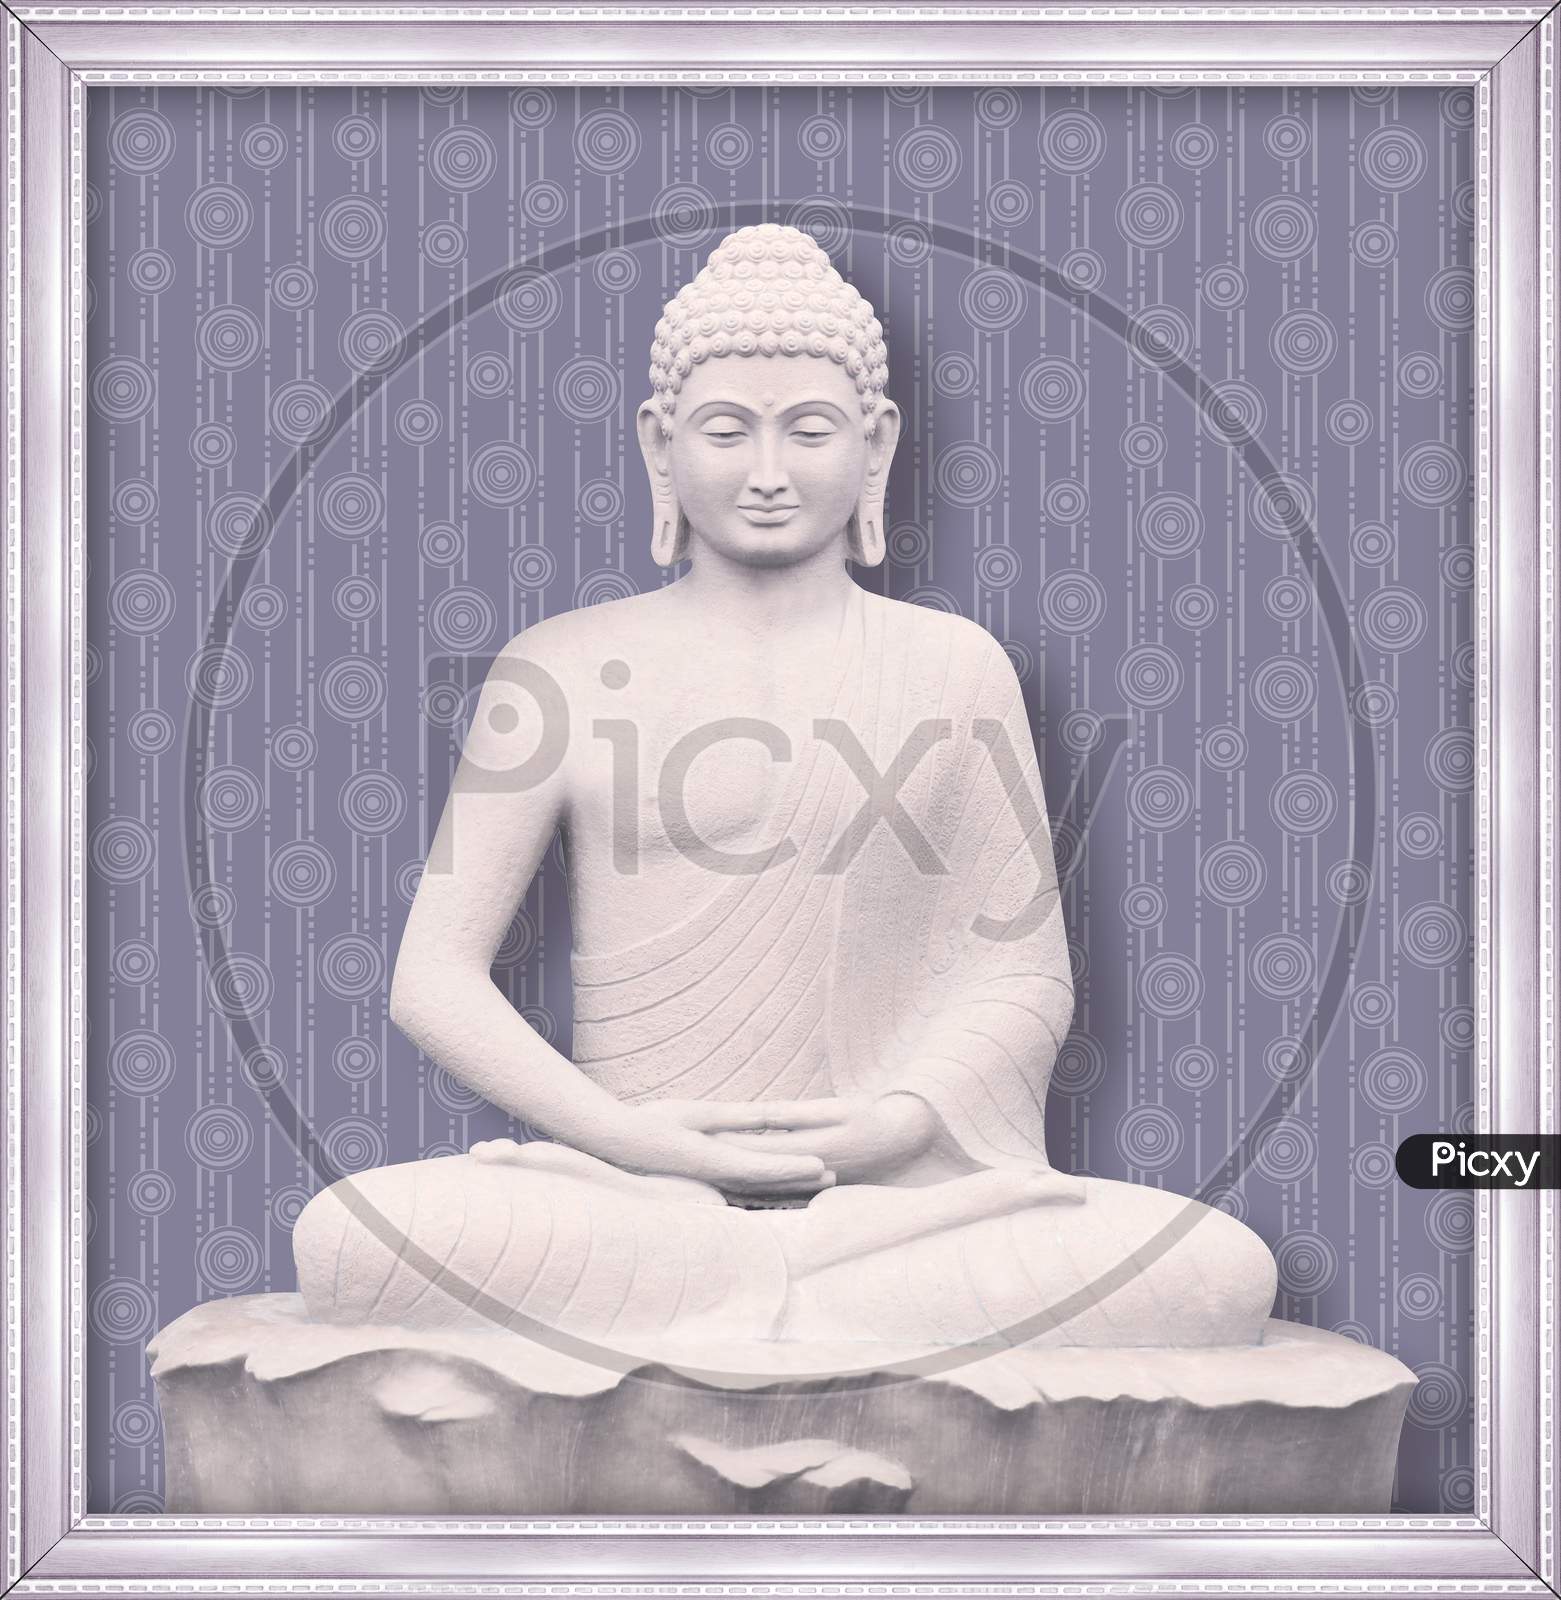 Buddha illustration Wall Art Rendering Wallpaper for Living room and Bedroom. Lord Buddha digital art work on abstract decorative background For Home Decoration, Beautiful poster.